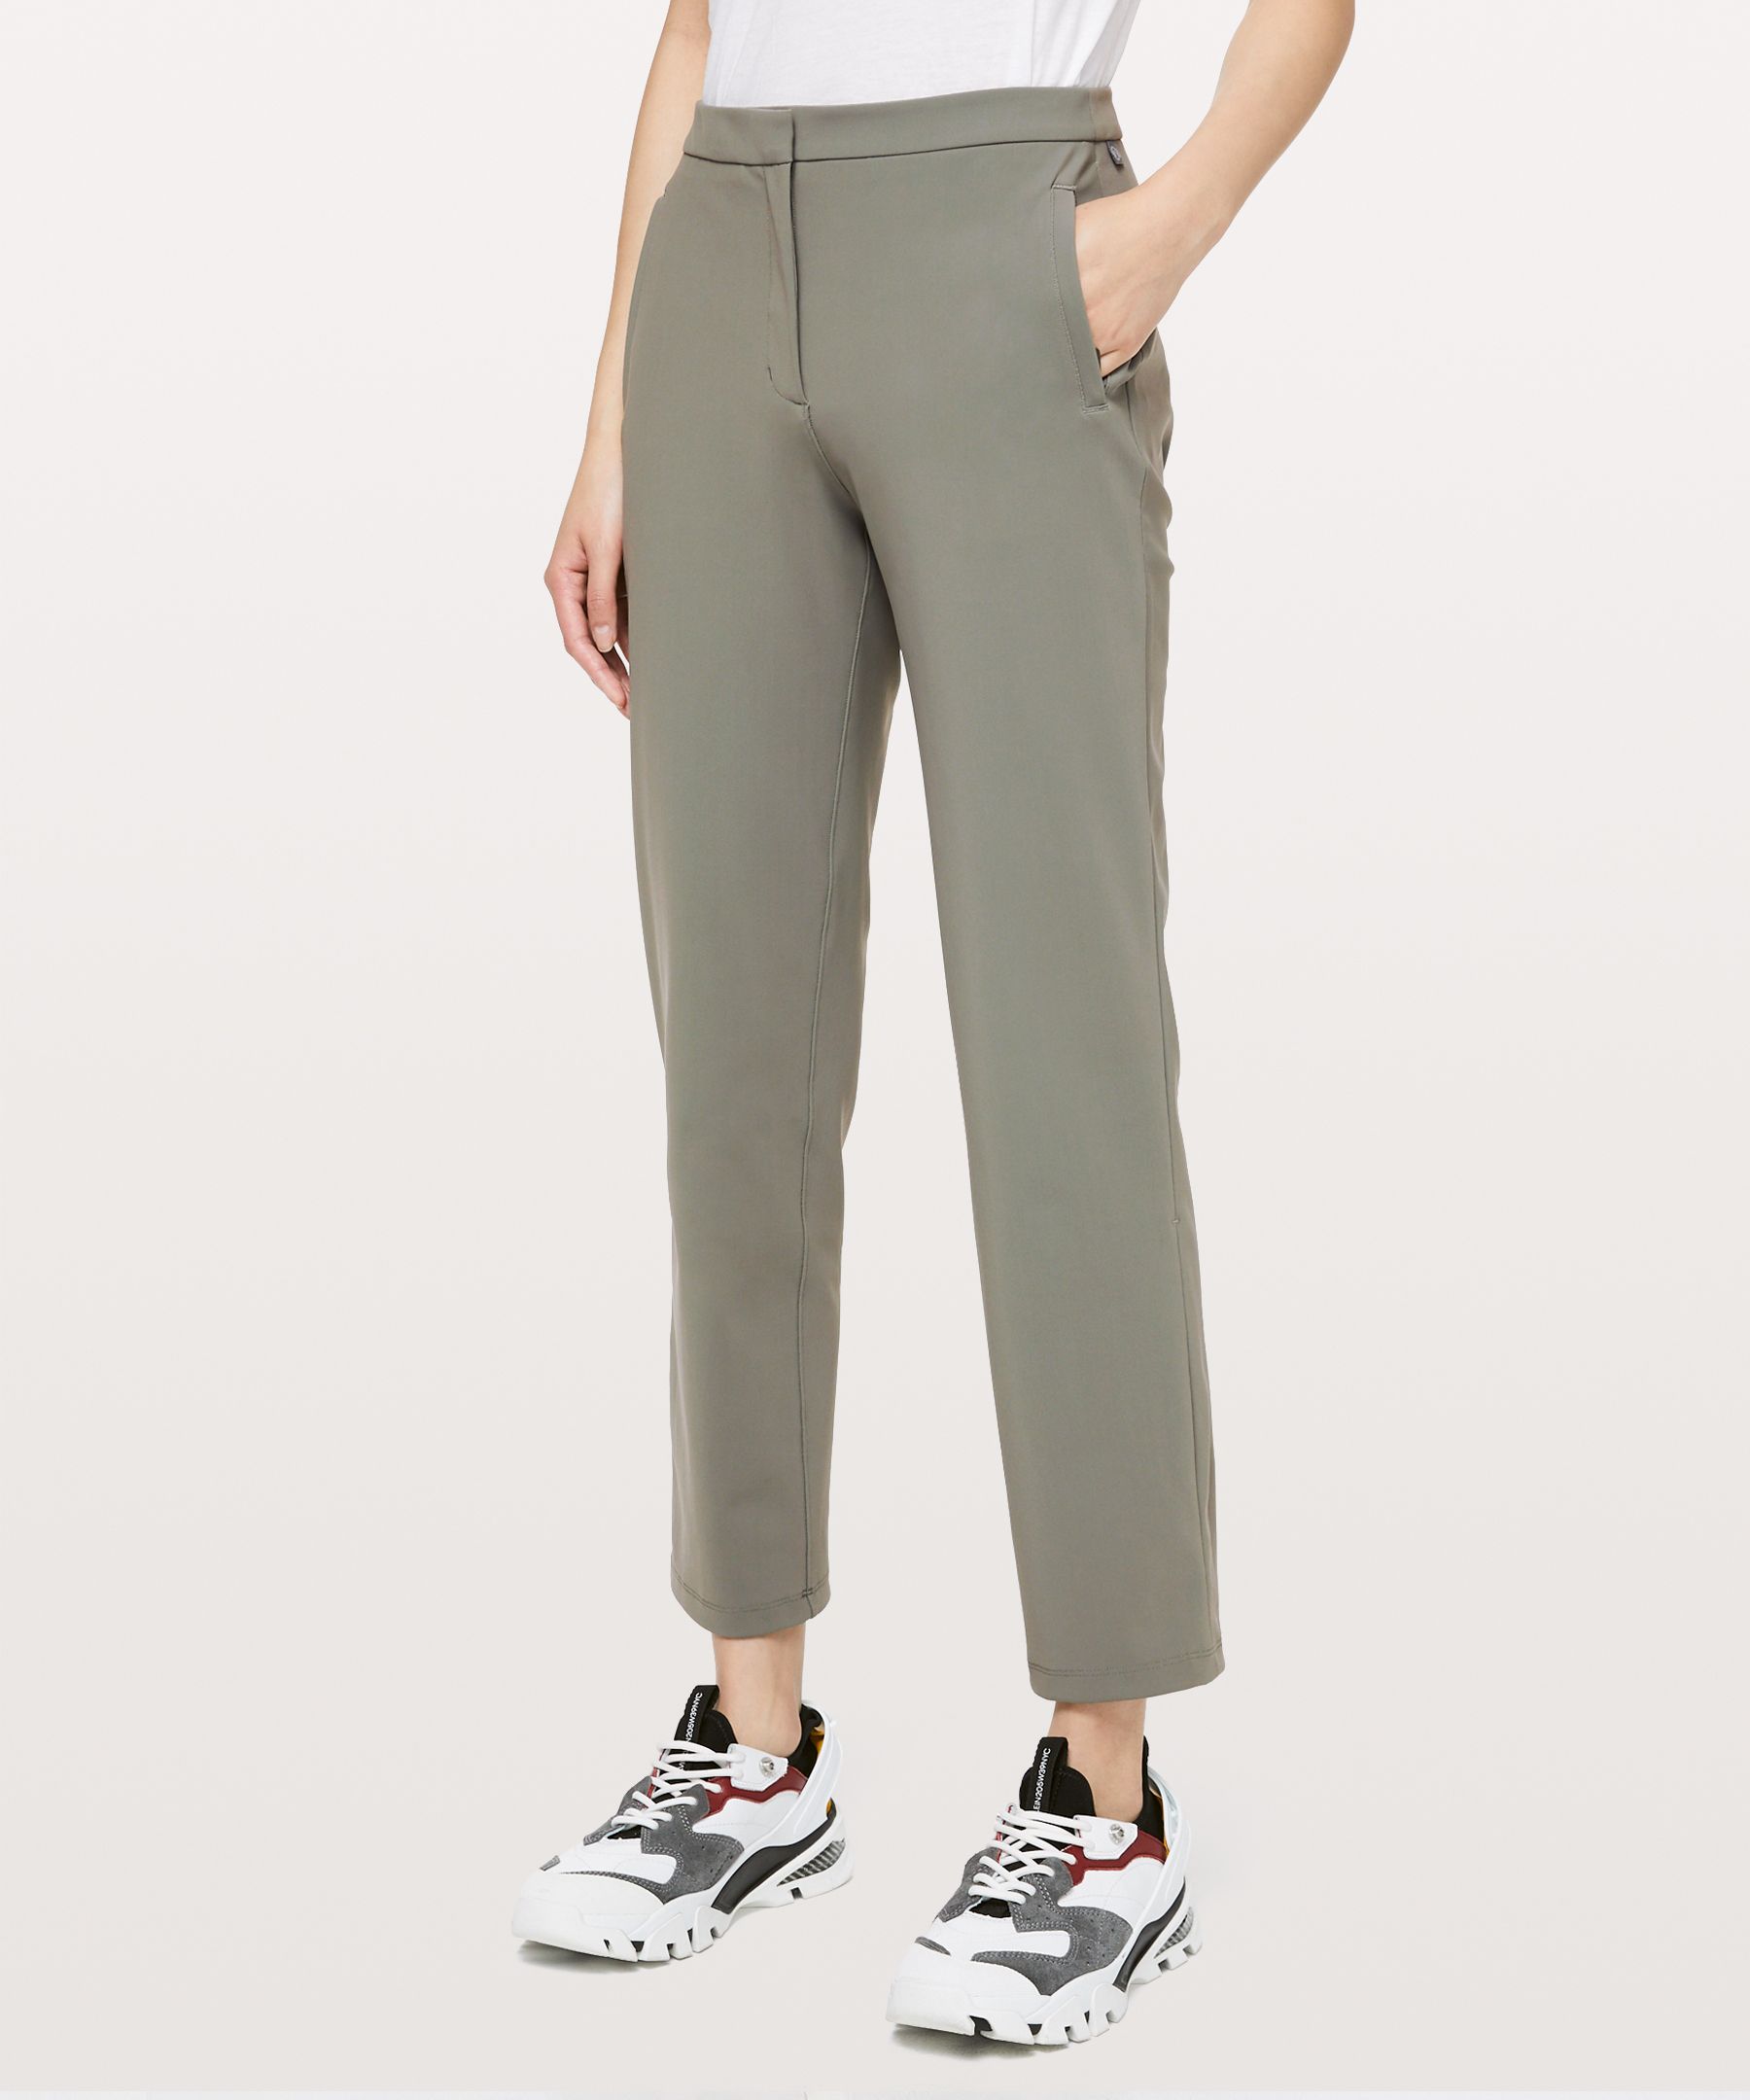 on the move pant lightweight